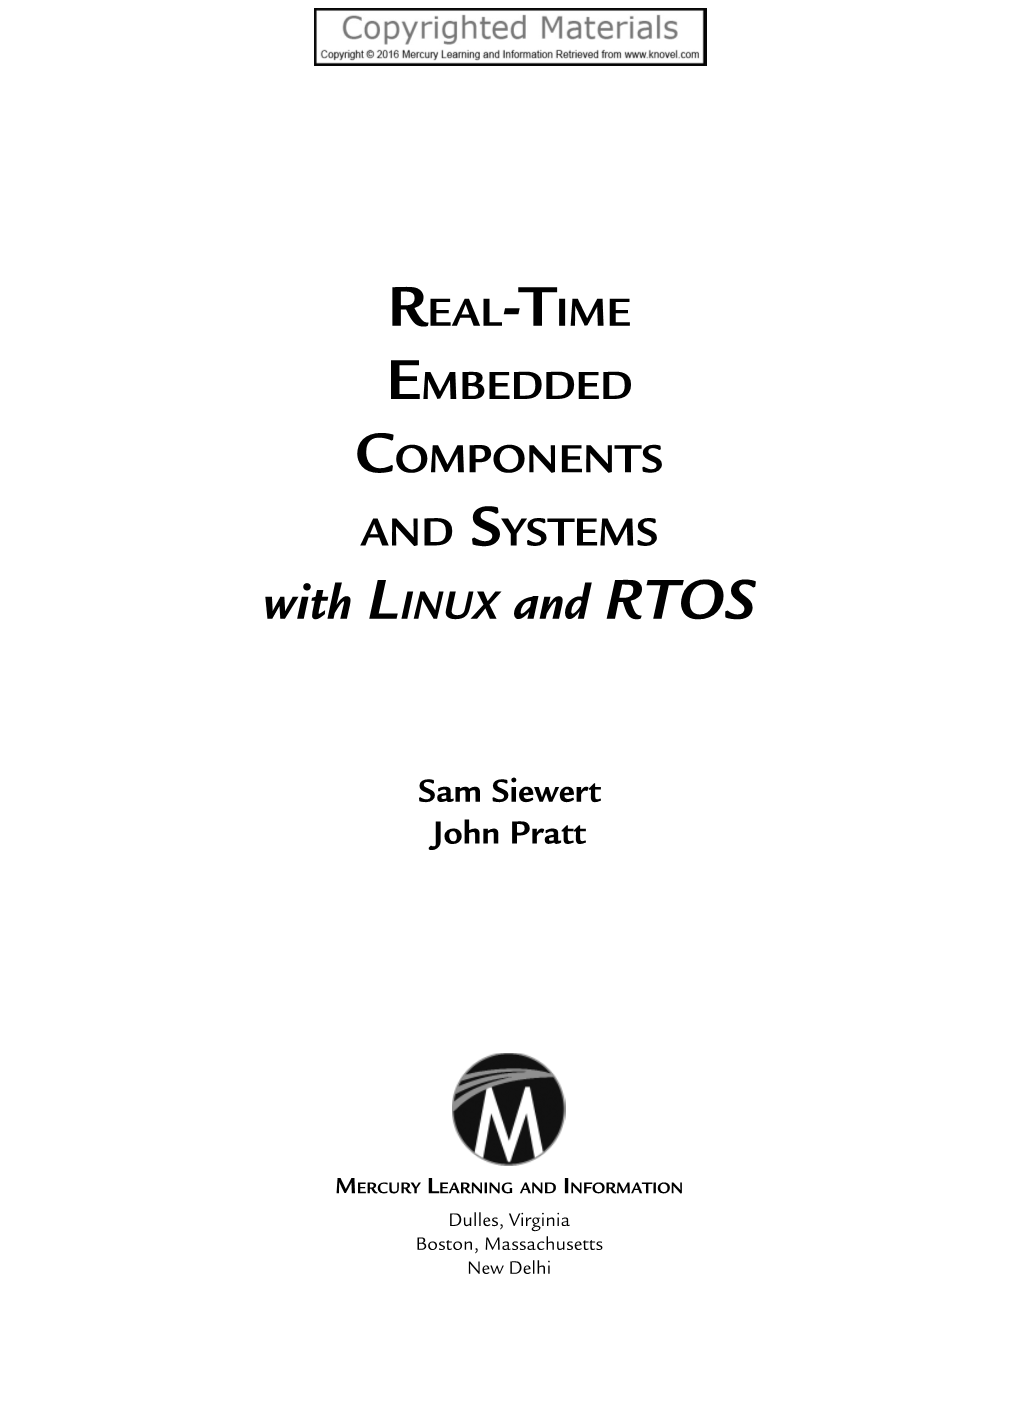 REAL-TIME EMBEDDED COMPONENTS and SYSTEMS with LINUX and RTOS